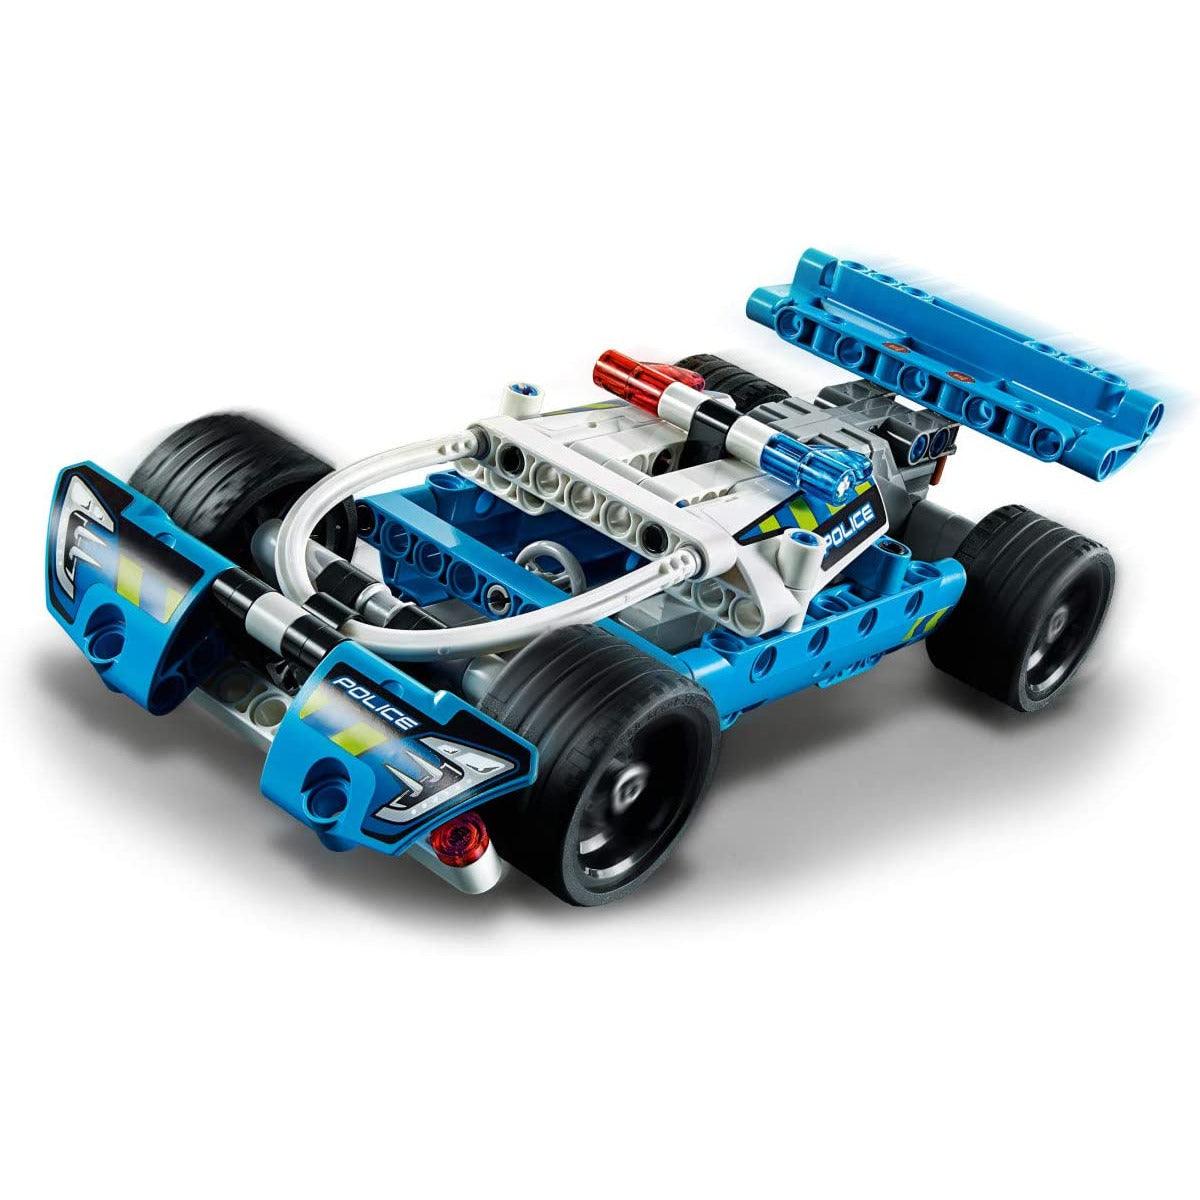 LEGO Technic Police Pursuit 42091 Building Kit (120 Pieces) - BumbleToys - 18+, 6+ Years, Boys, Cars, LEGO, OXE, Technic